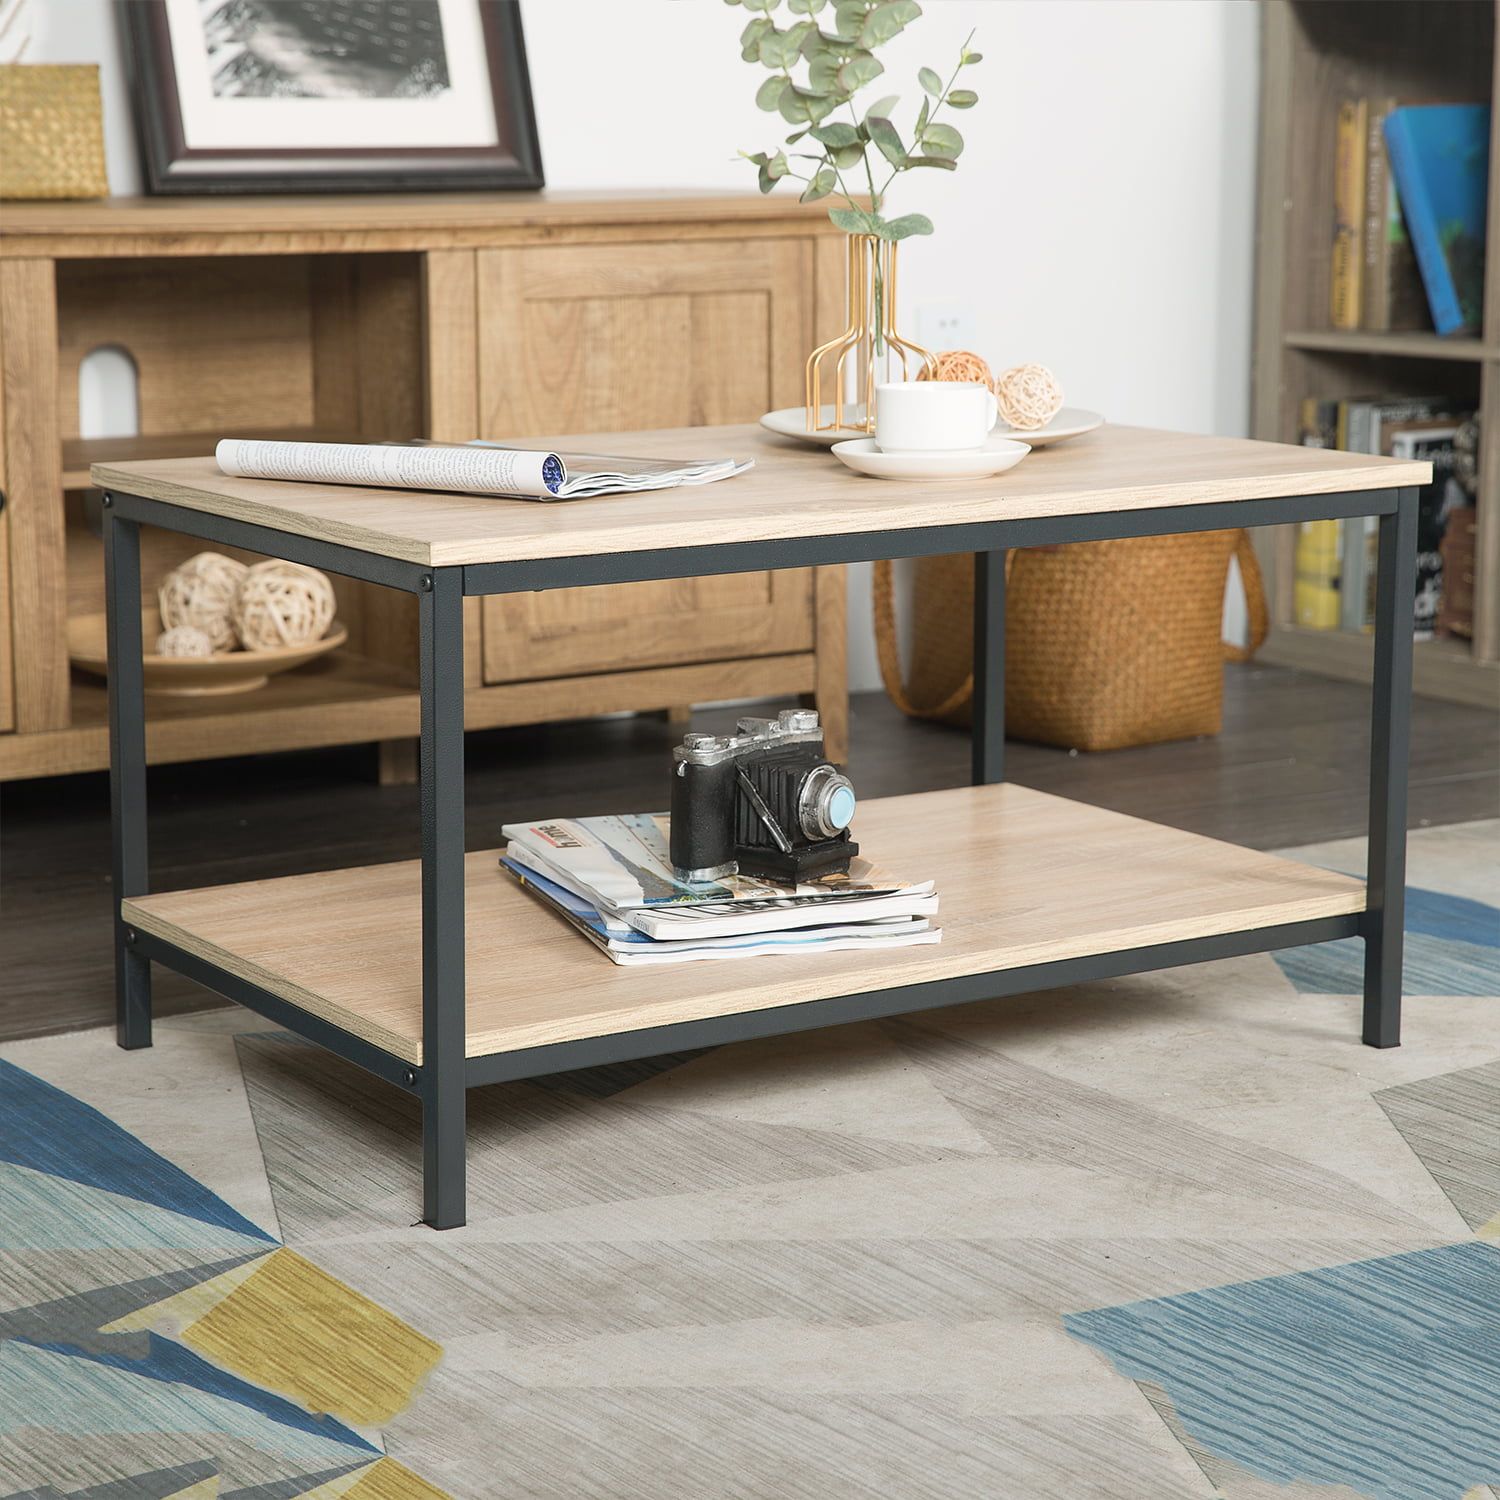 Finefind Modern Industrial Metal Rectangular Coffee Table With Storage With Regard To Metal 1 Shelf Coffee Tables (View 11 of 15)